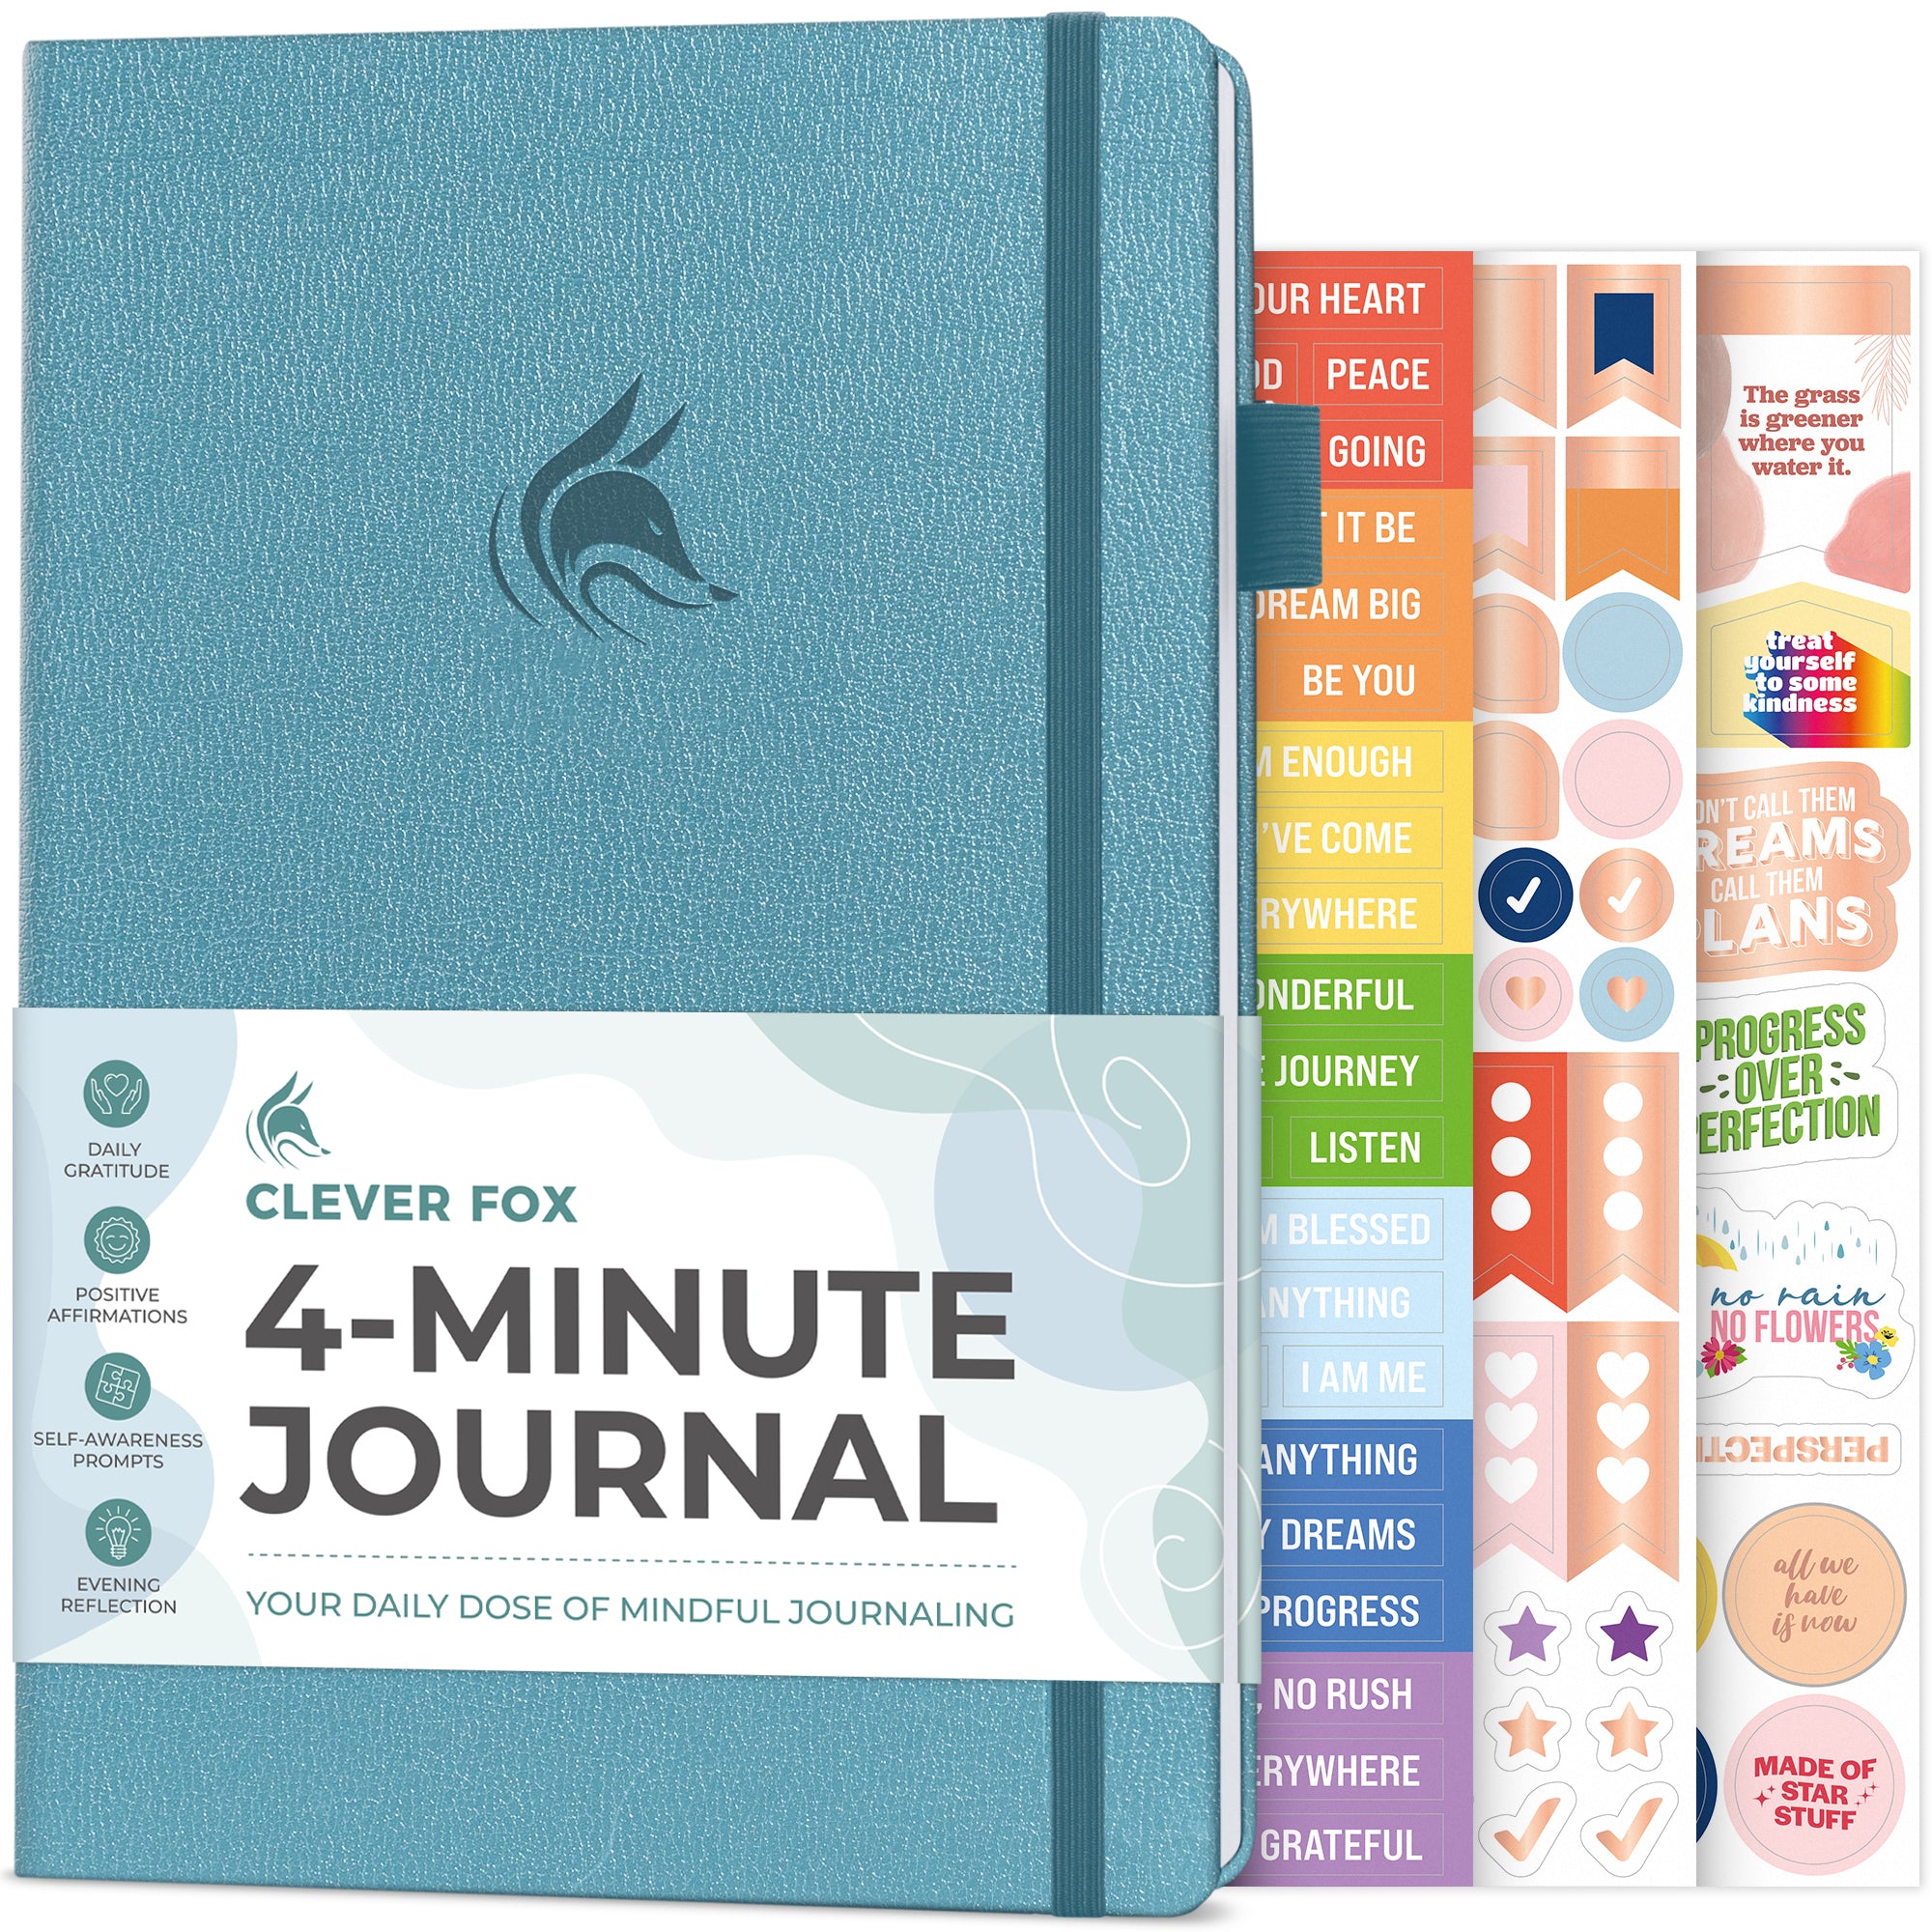 Four Minute Journal – Clever Fox®